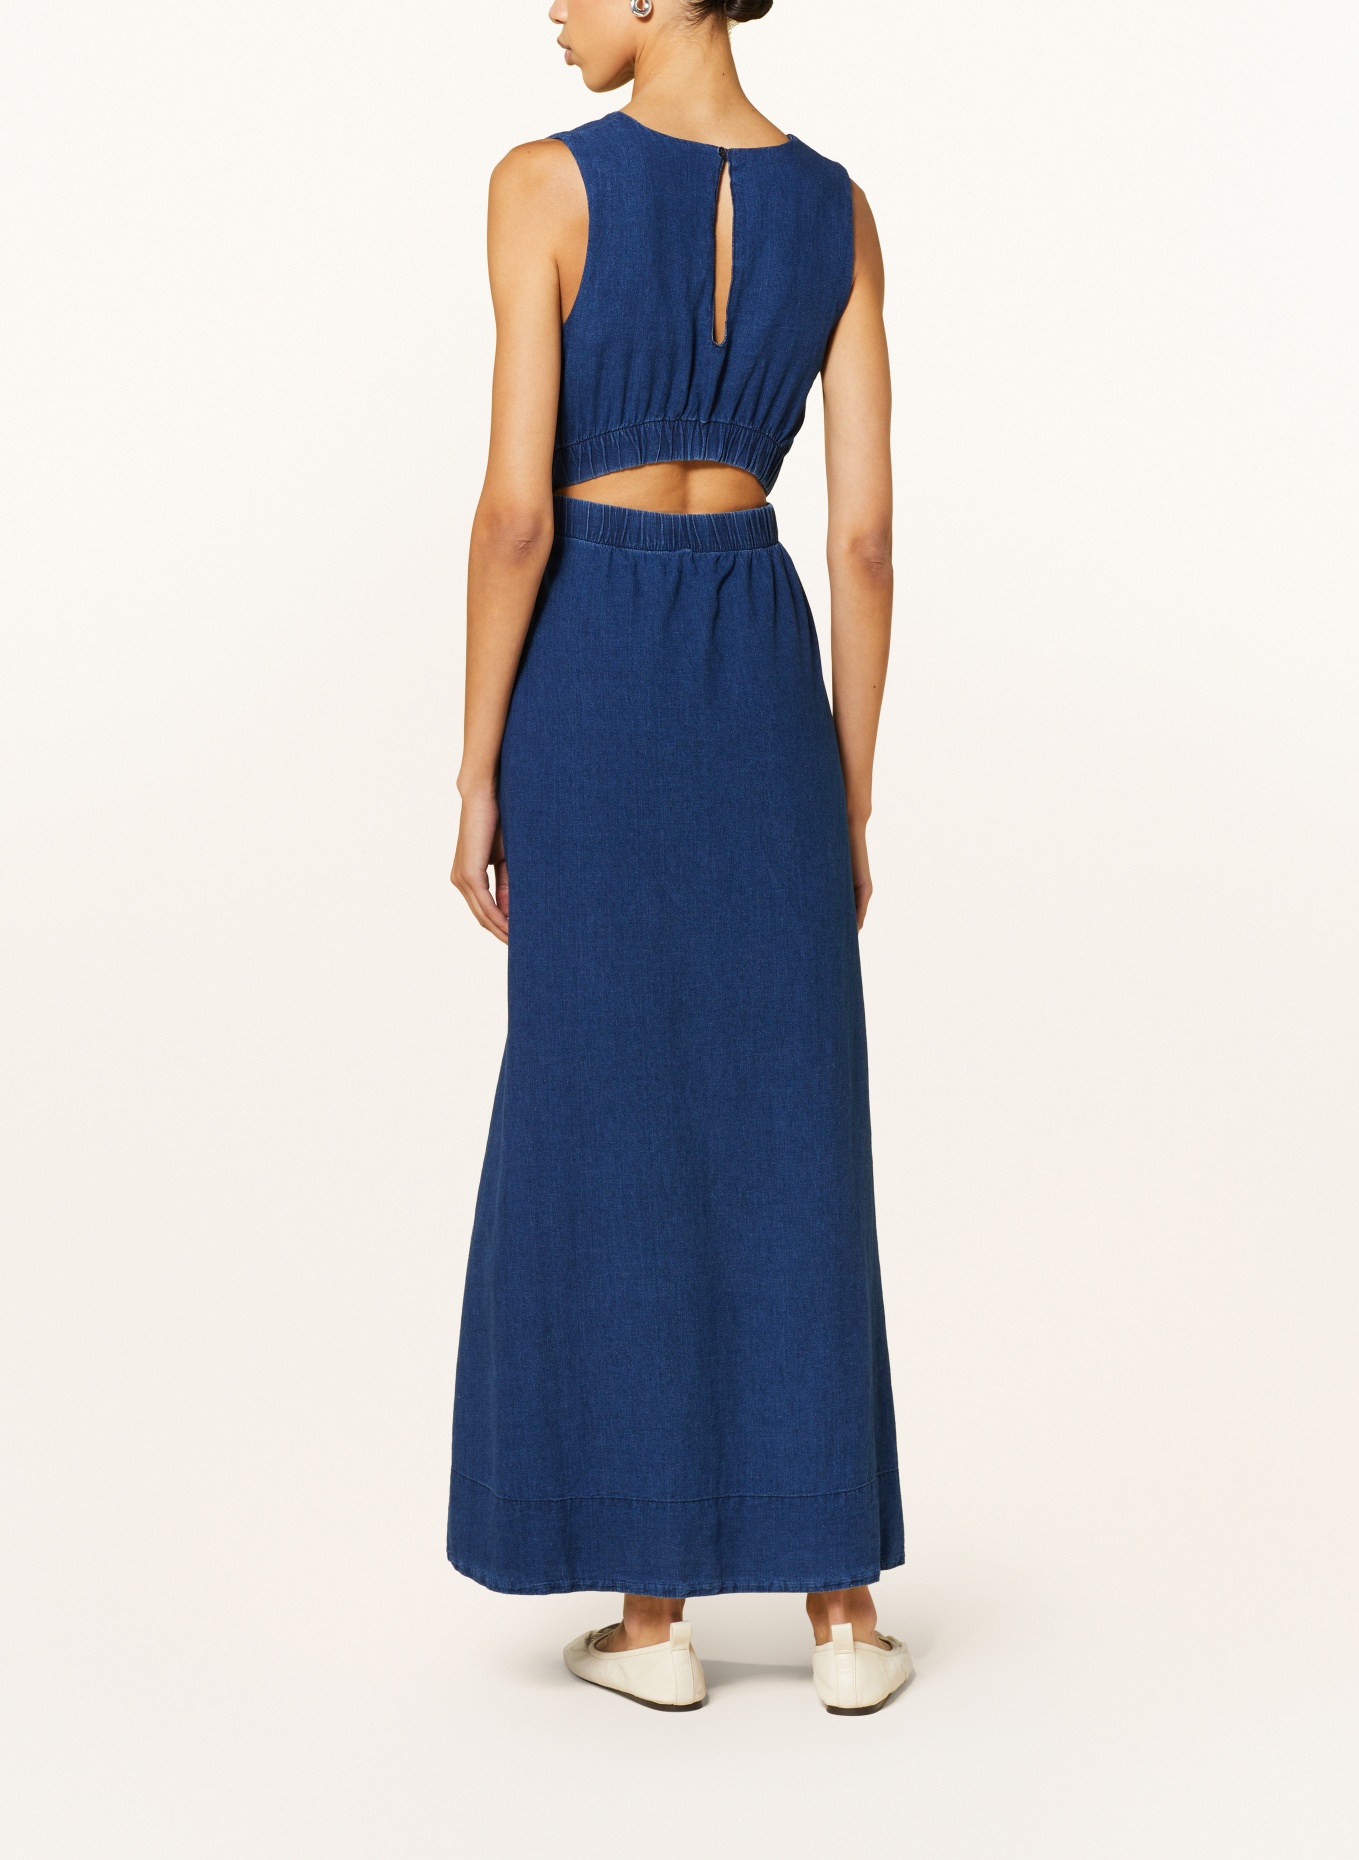 CLOSED Dress in denim look with cut-out, Color: DARK BLUE (Image 3)